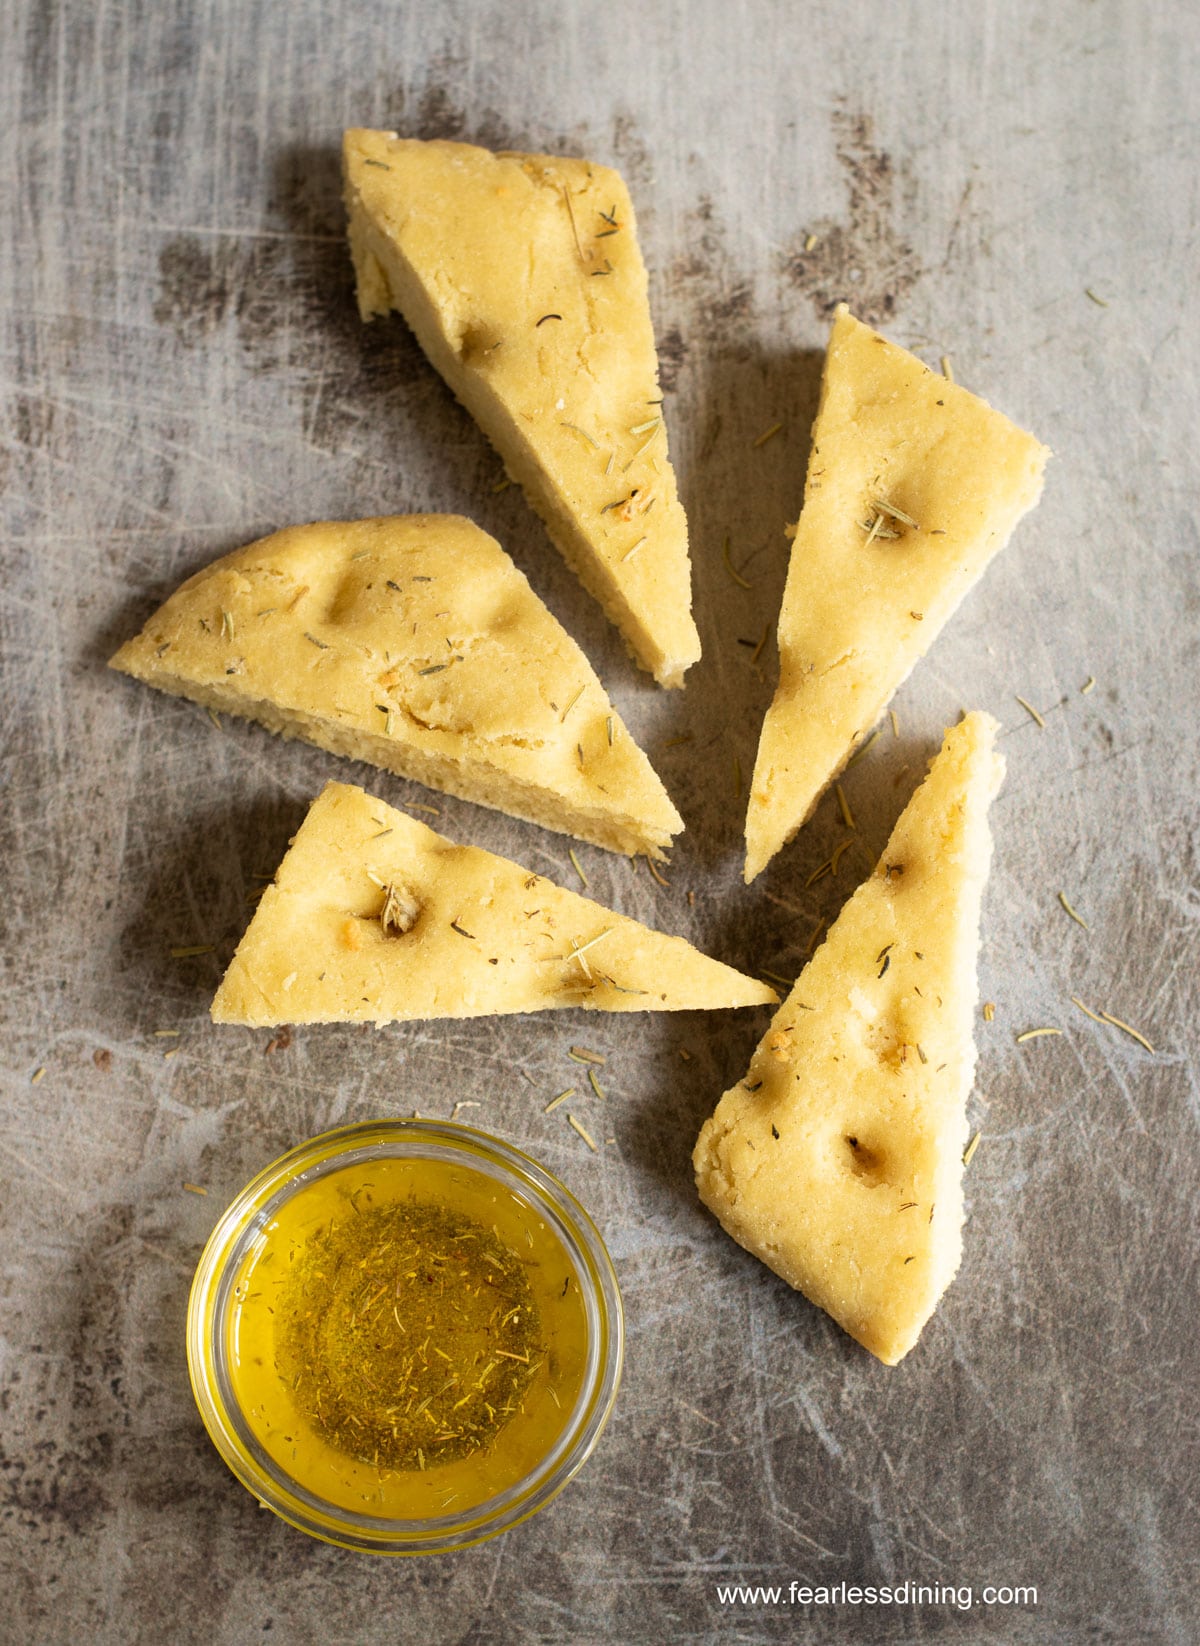 Wedge shaped pieces of gluten free focaccia next to a dipping oil bowl.